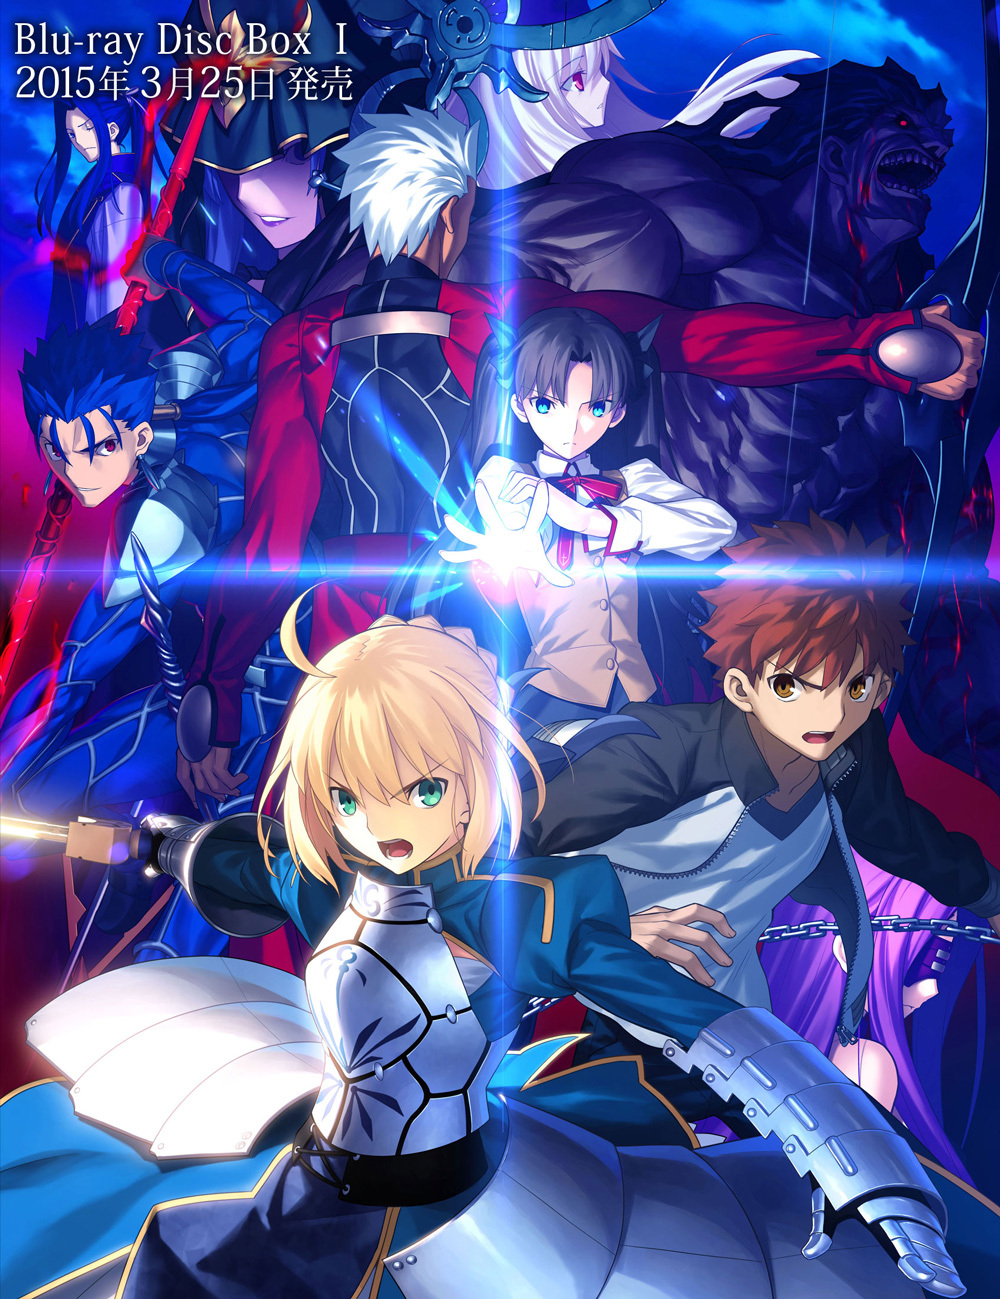 Fate/stay night: Unlimited Blade Works (TV) 2nd Season - Sunny Day - Fate/stay night [Unlimited Blade Works] 新作映像「sunny day」